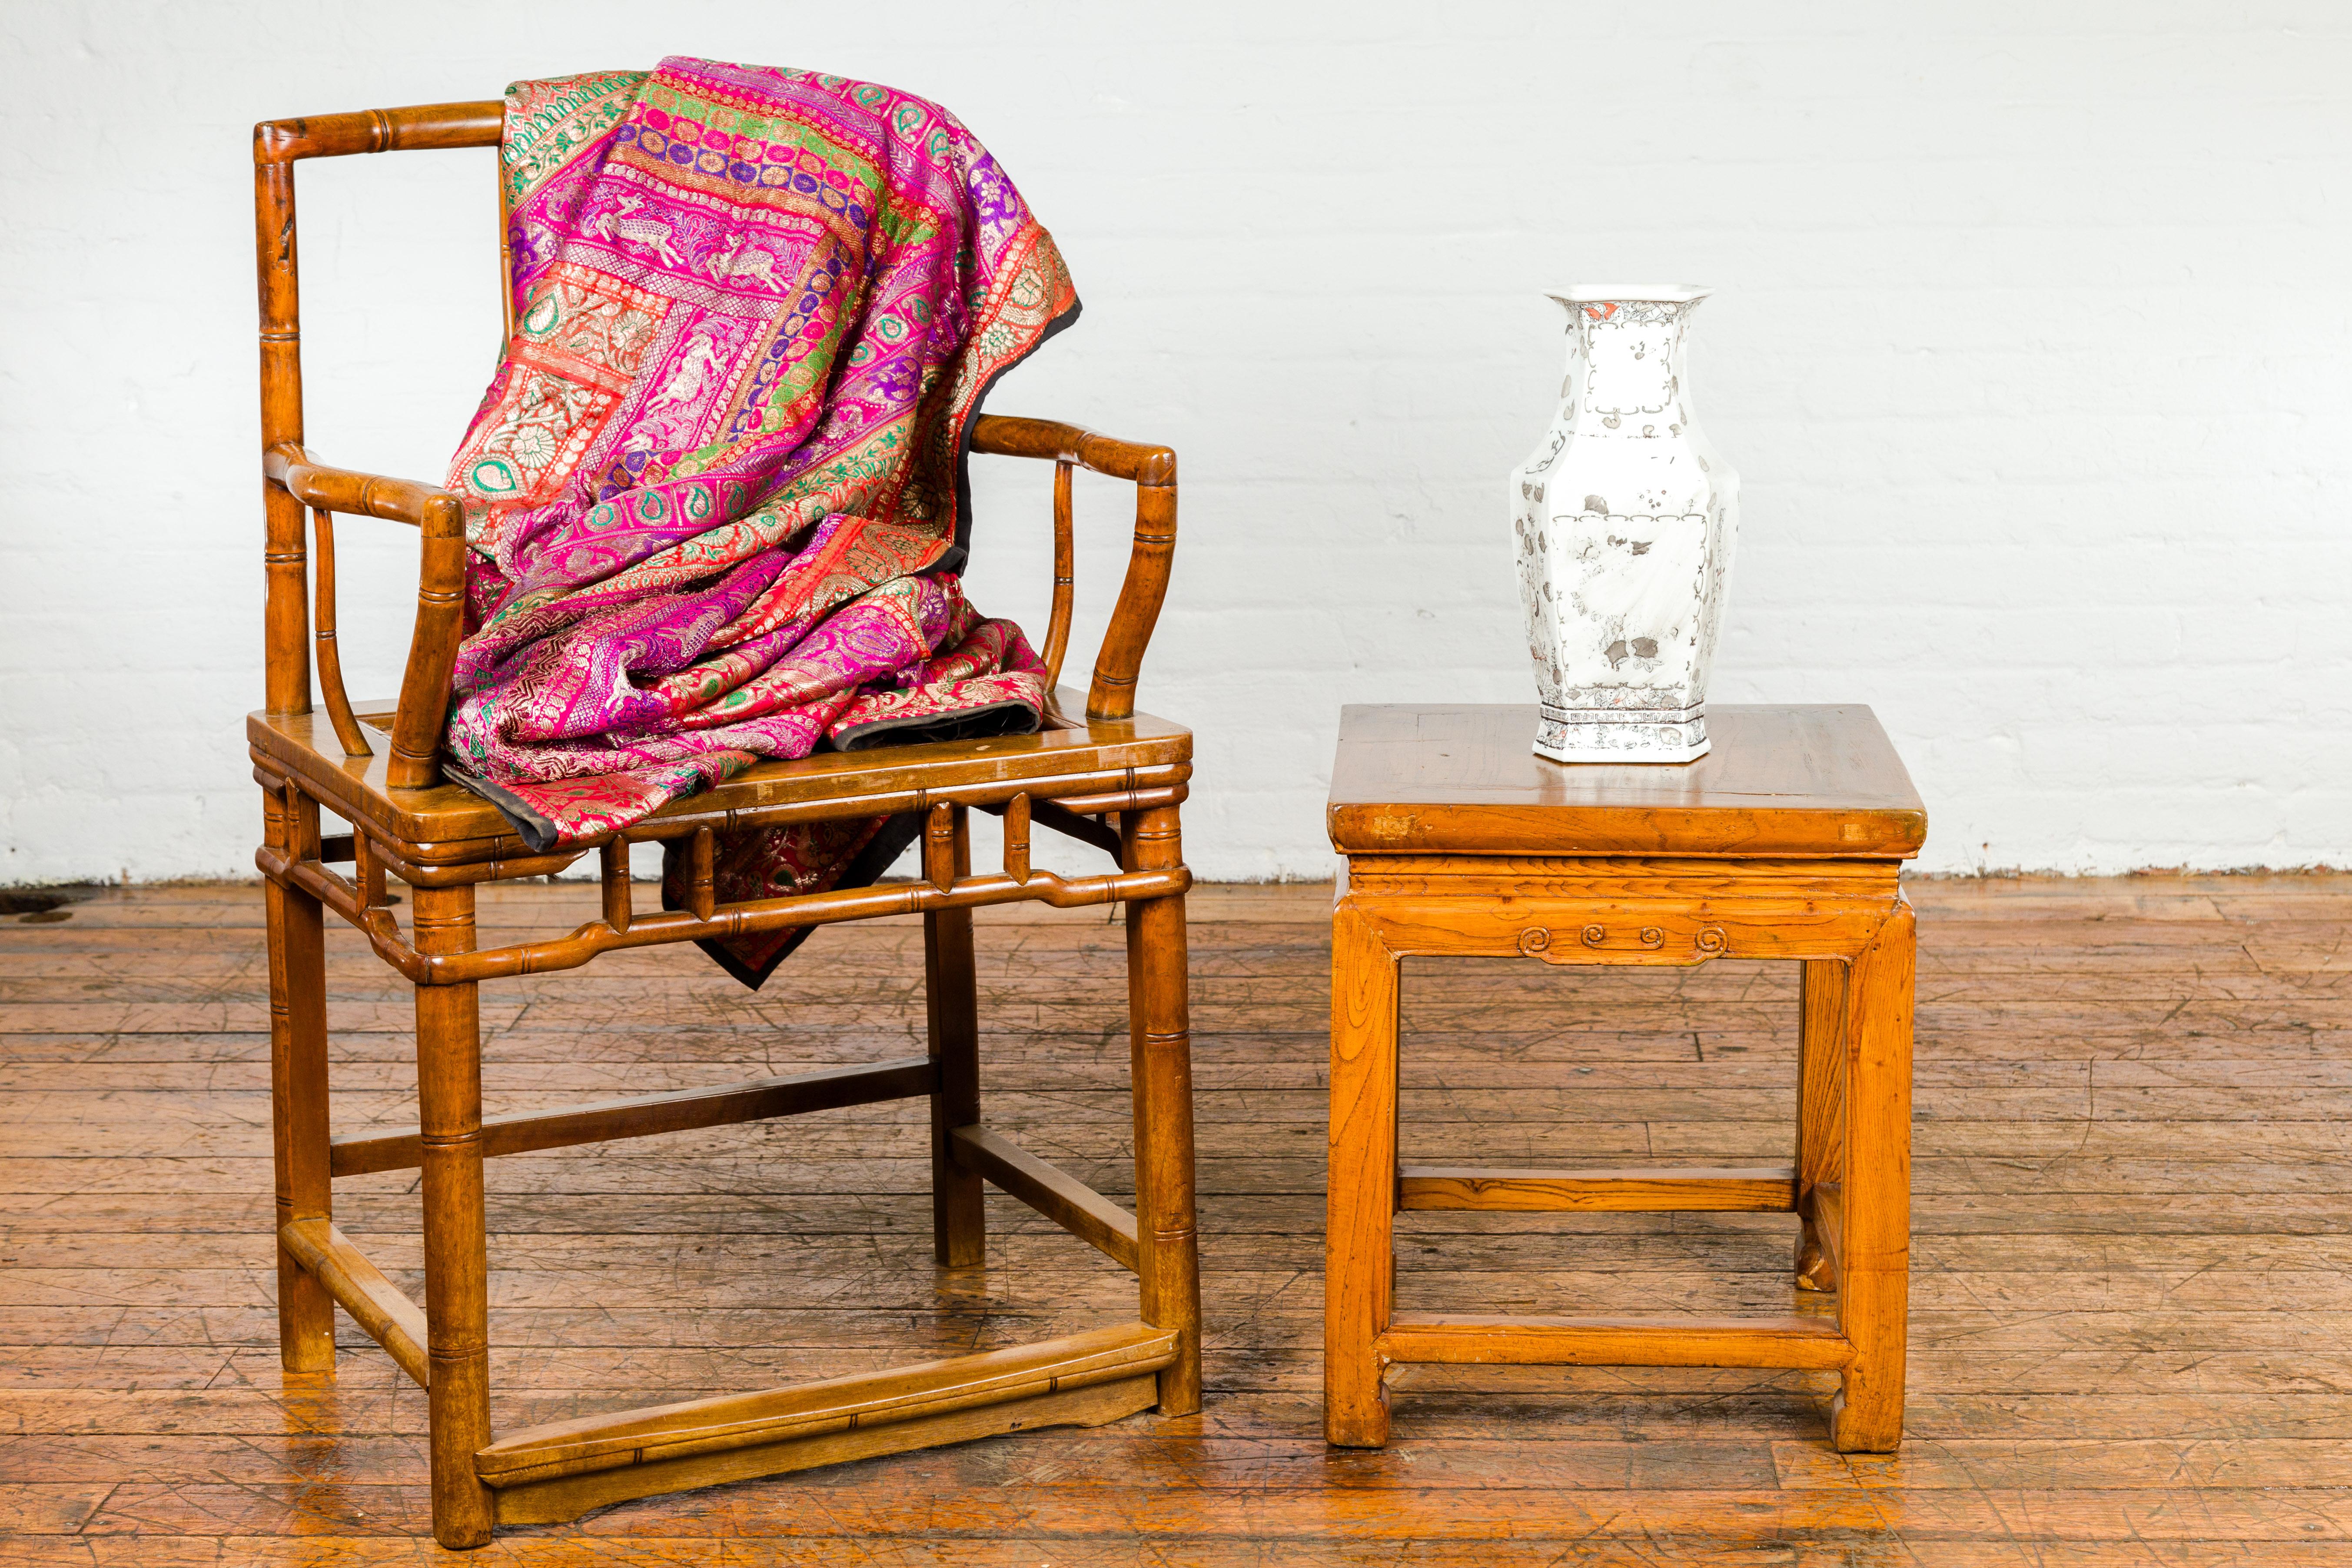 A small late Qing Dynasty period side table or stool from the early 20th century with waisted top, carved apron, horse hoof legs and side stretchers. Exuding age-old artisanship, this late Qing Dynasty side table, or stool, is a perfect mix of